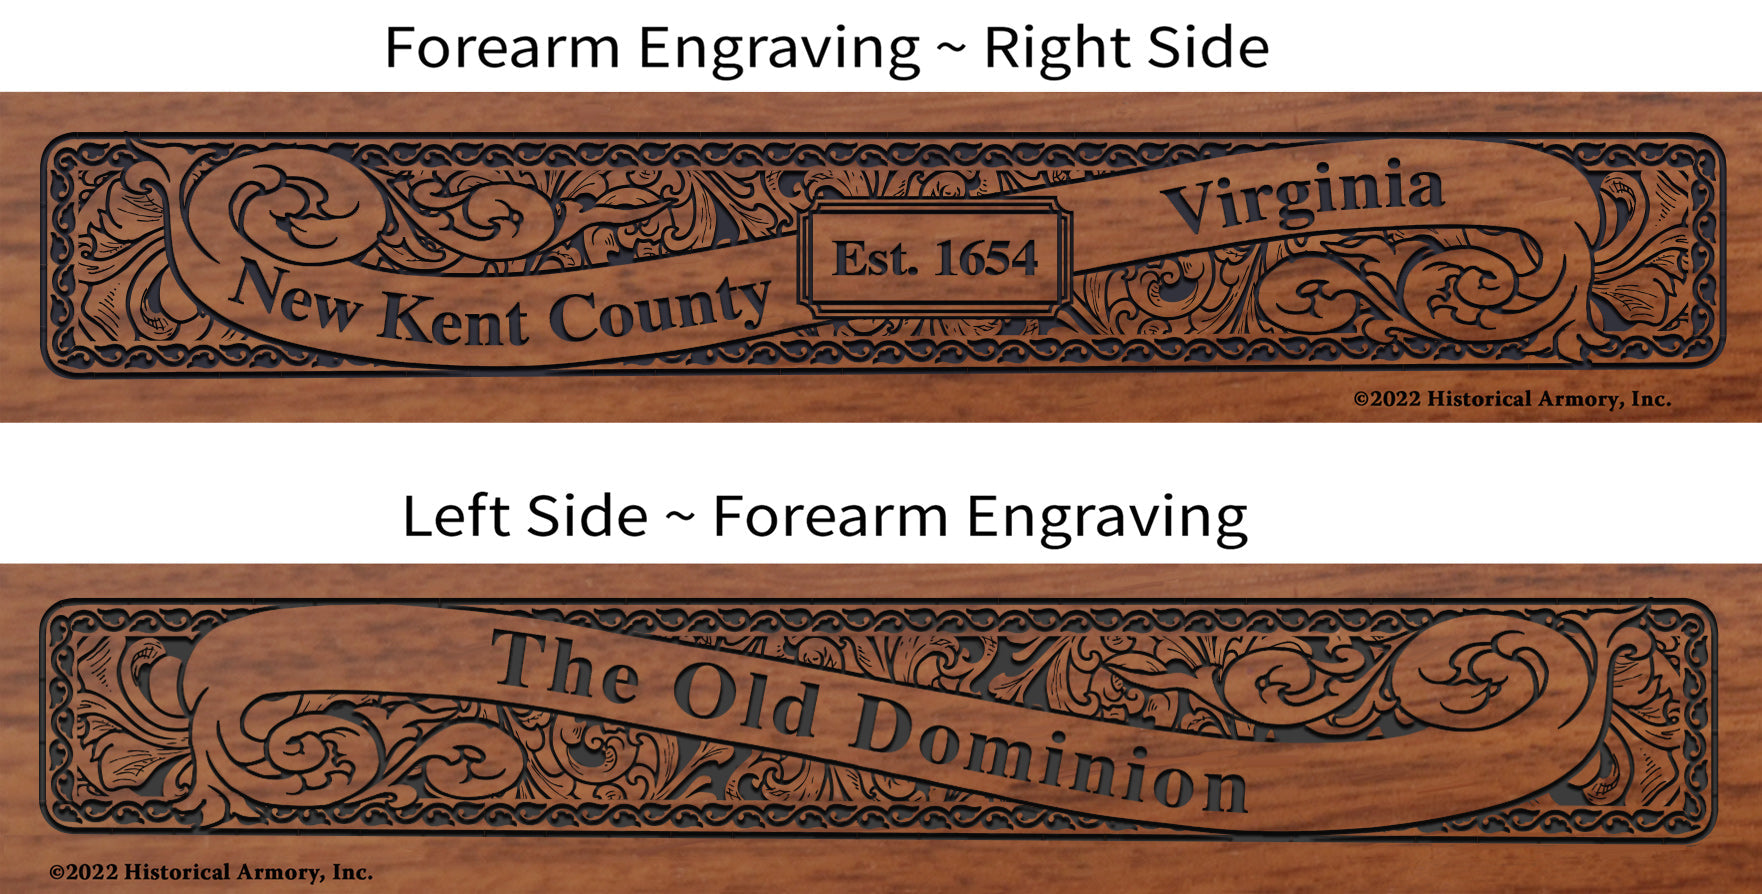 New Kent County Virginia Engraved Rifle Forearm